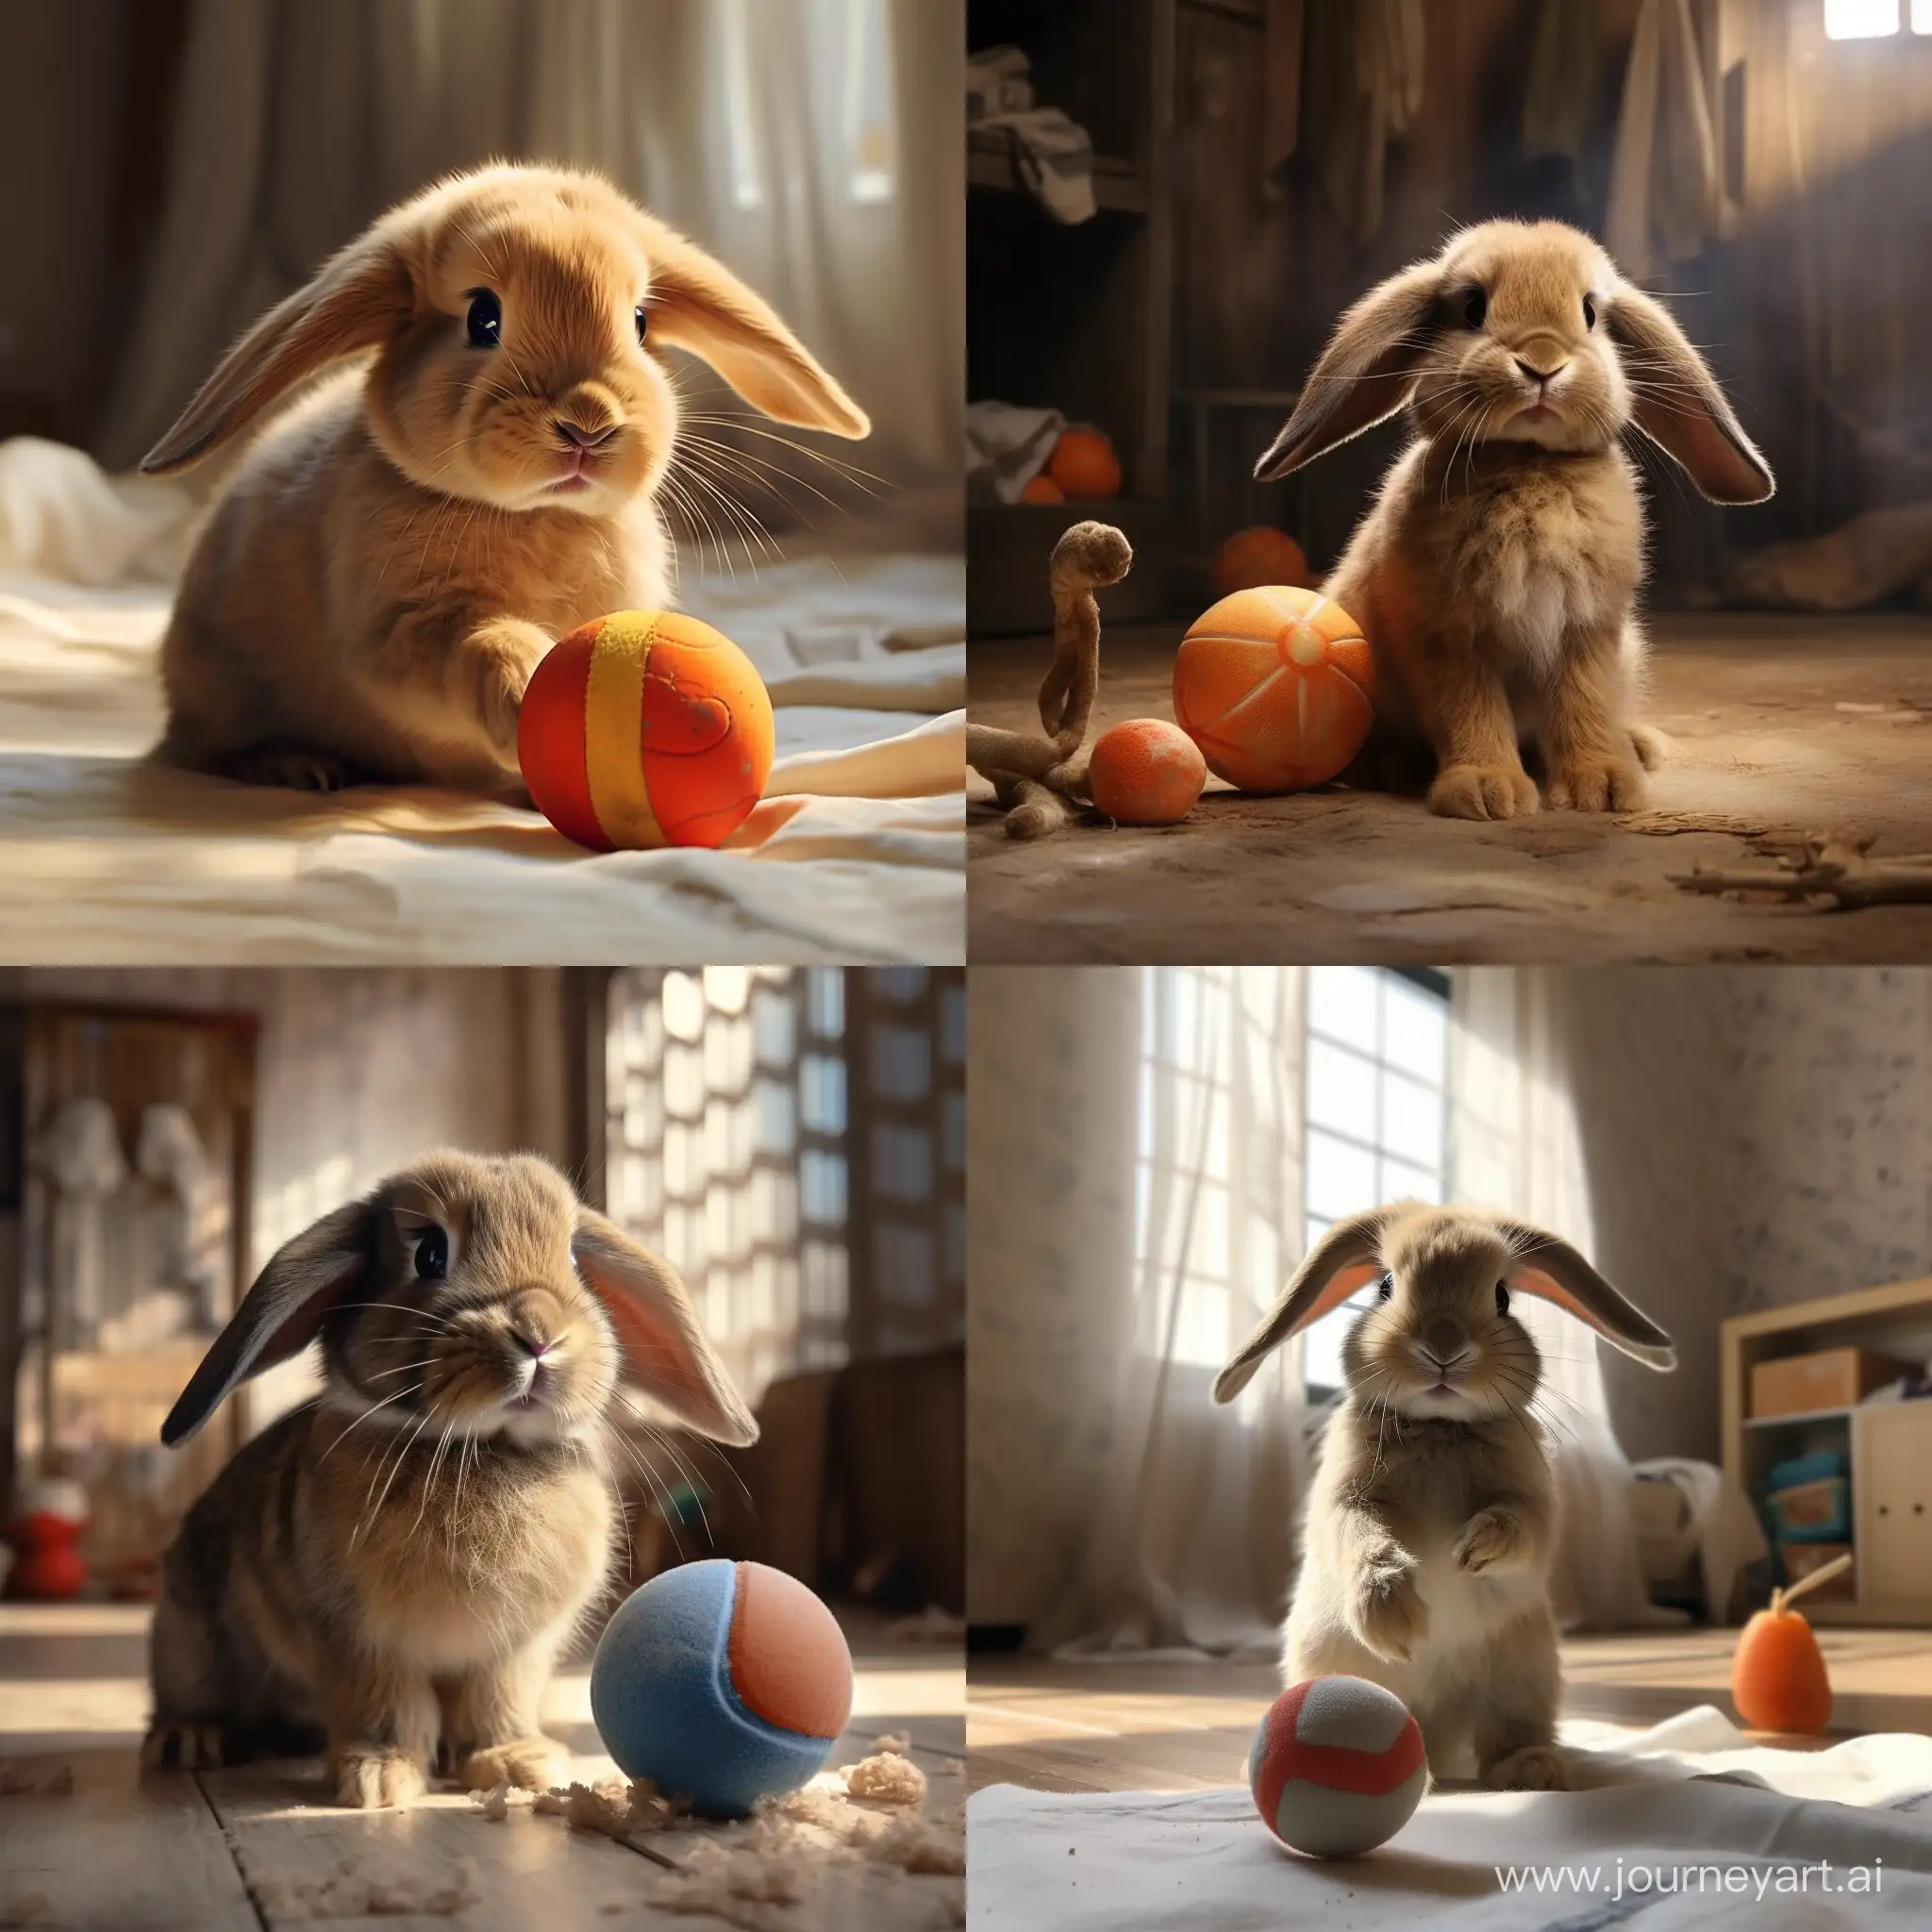 Adorable-Indoor-Rabbit-Playing-with-a-Toy-Ball